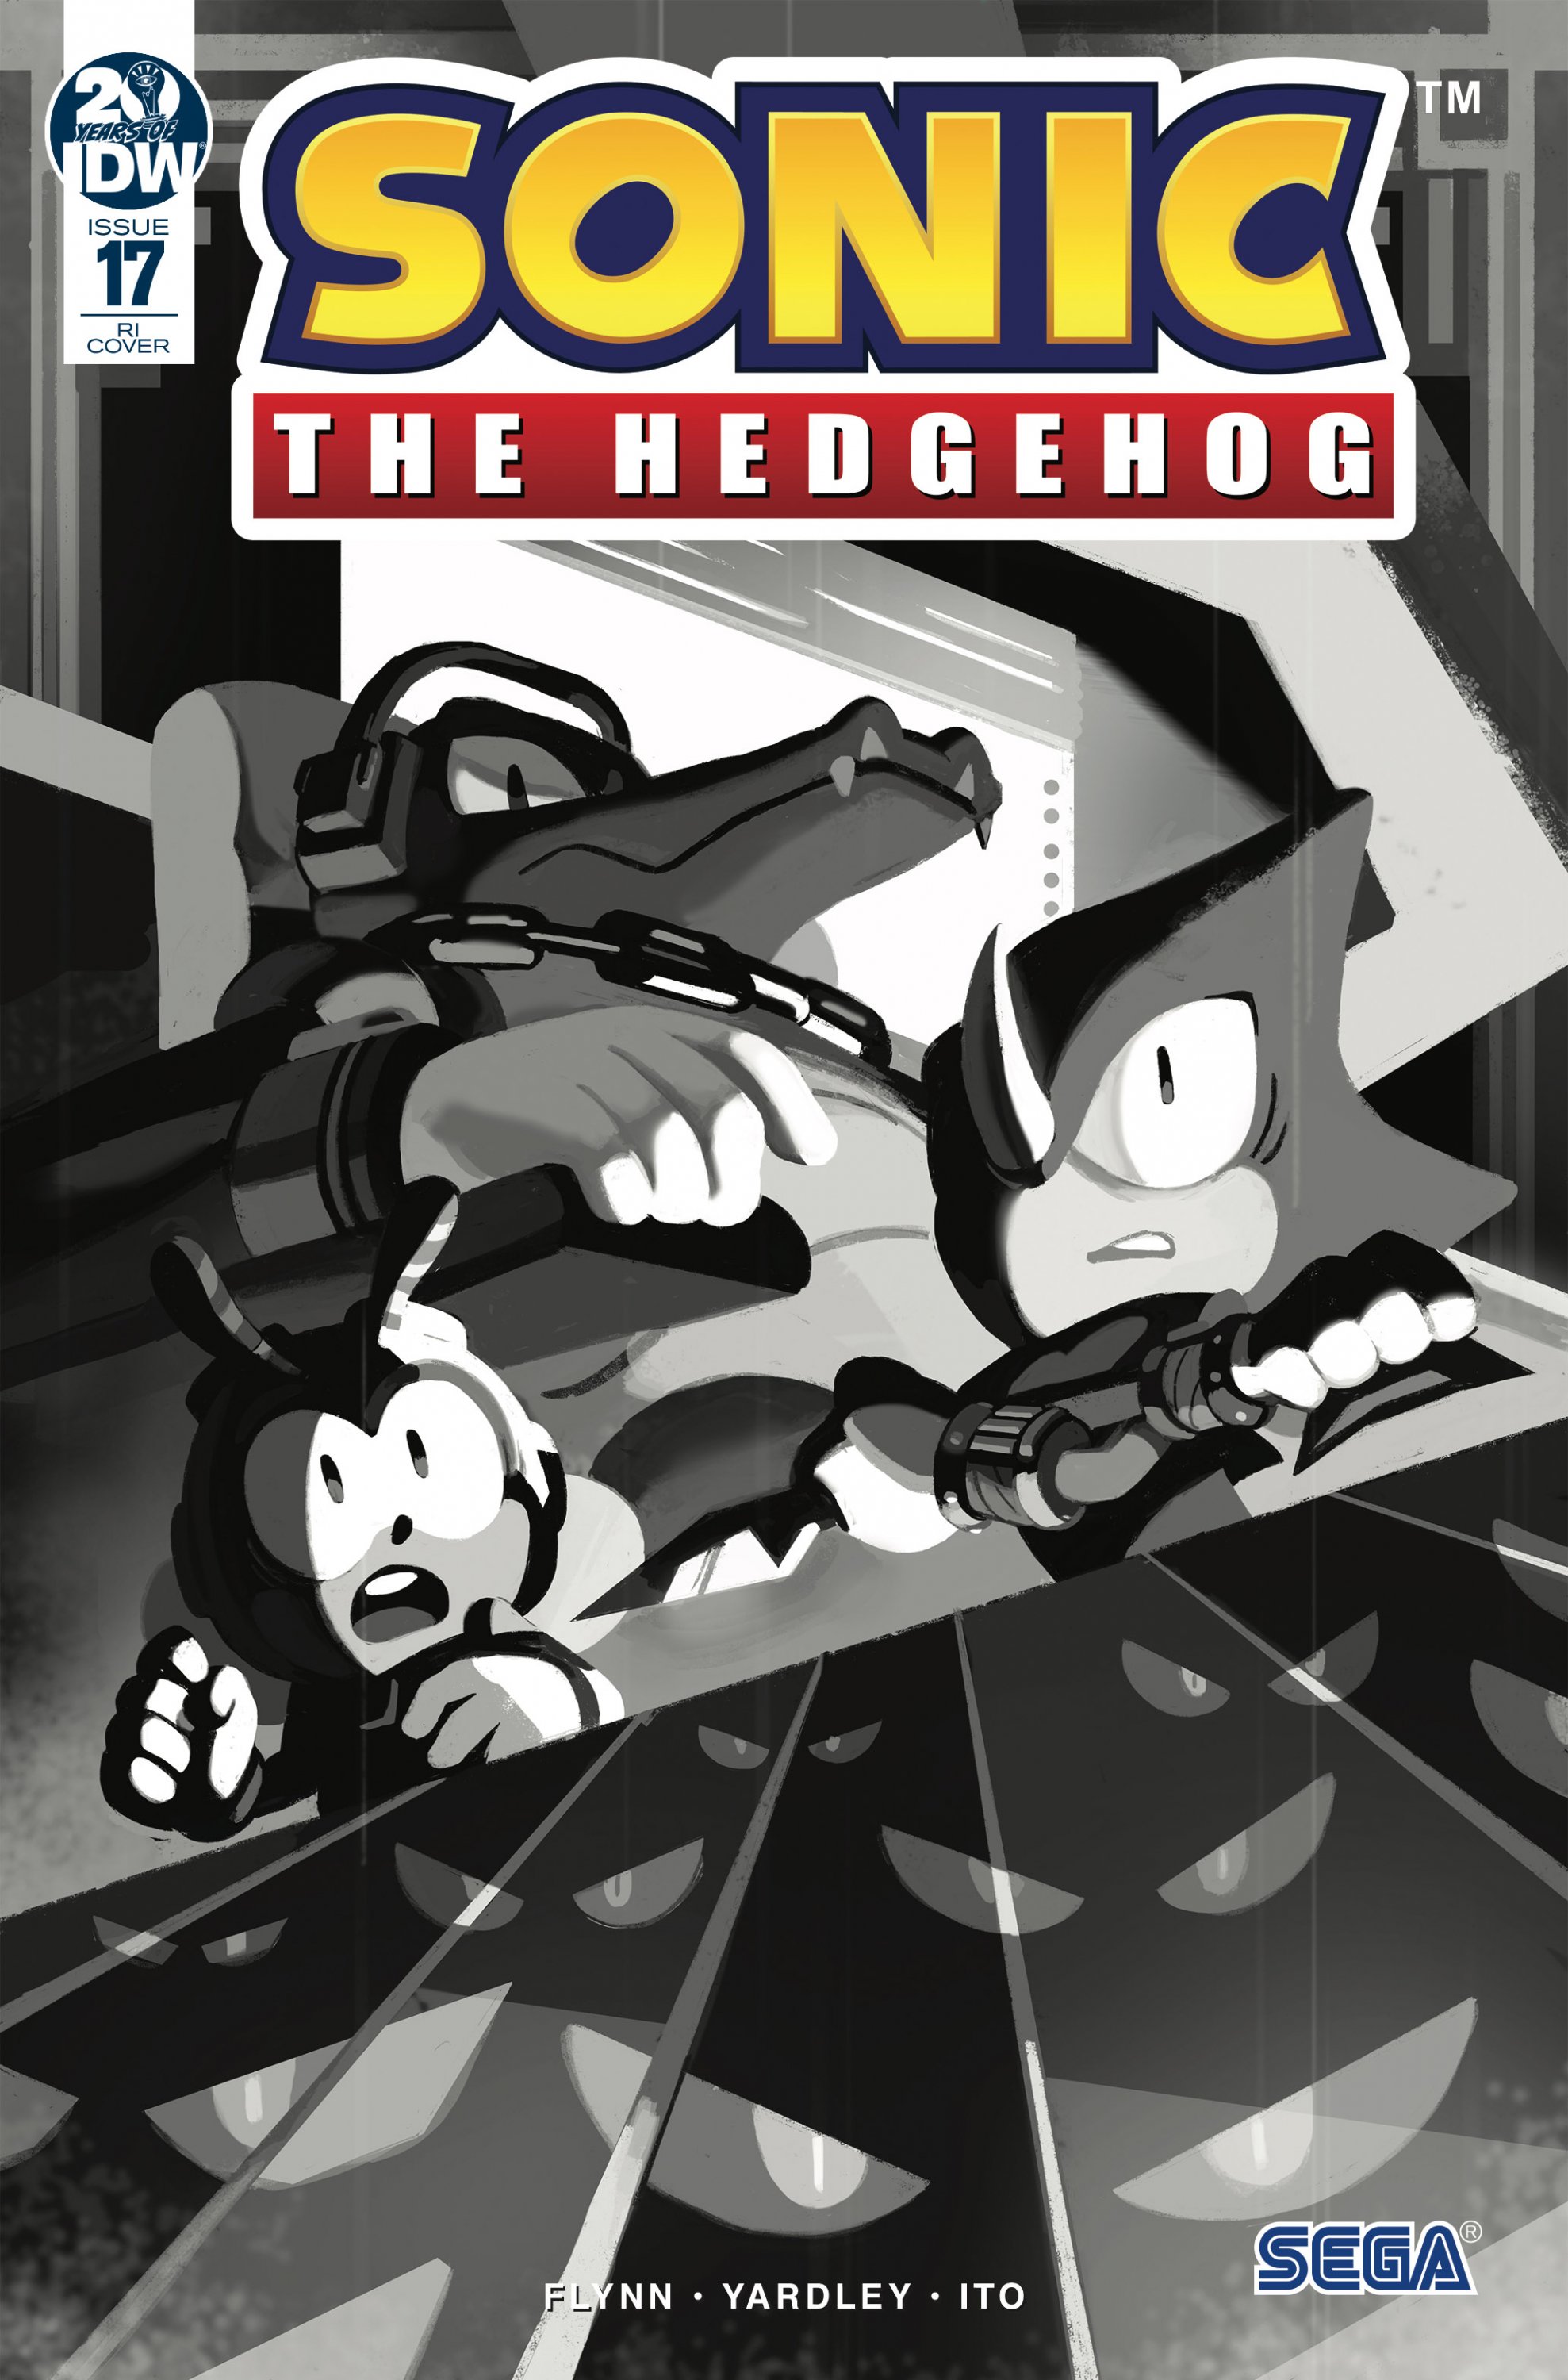 Sonic the Hedgehog 017 (May 2019) (retailer incentive)